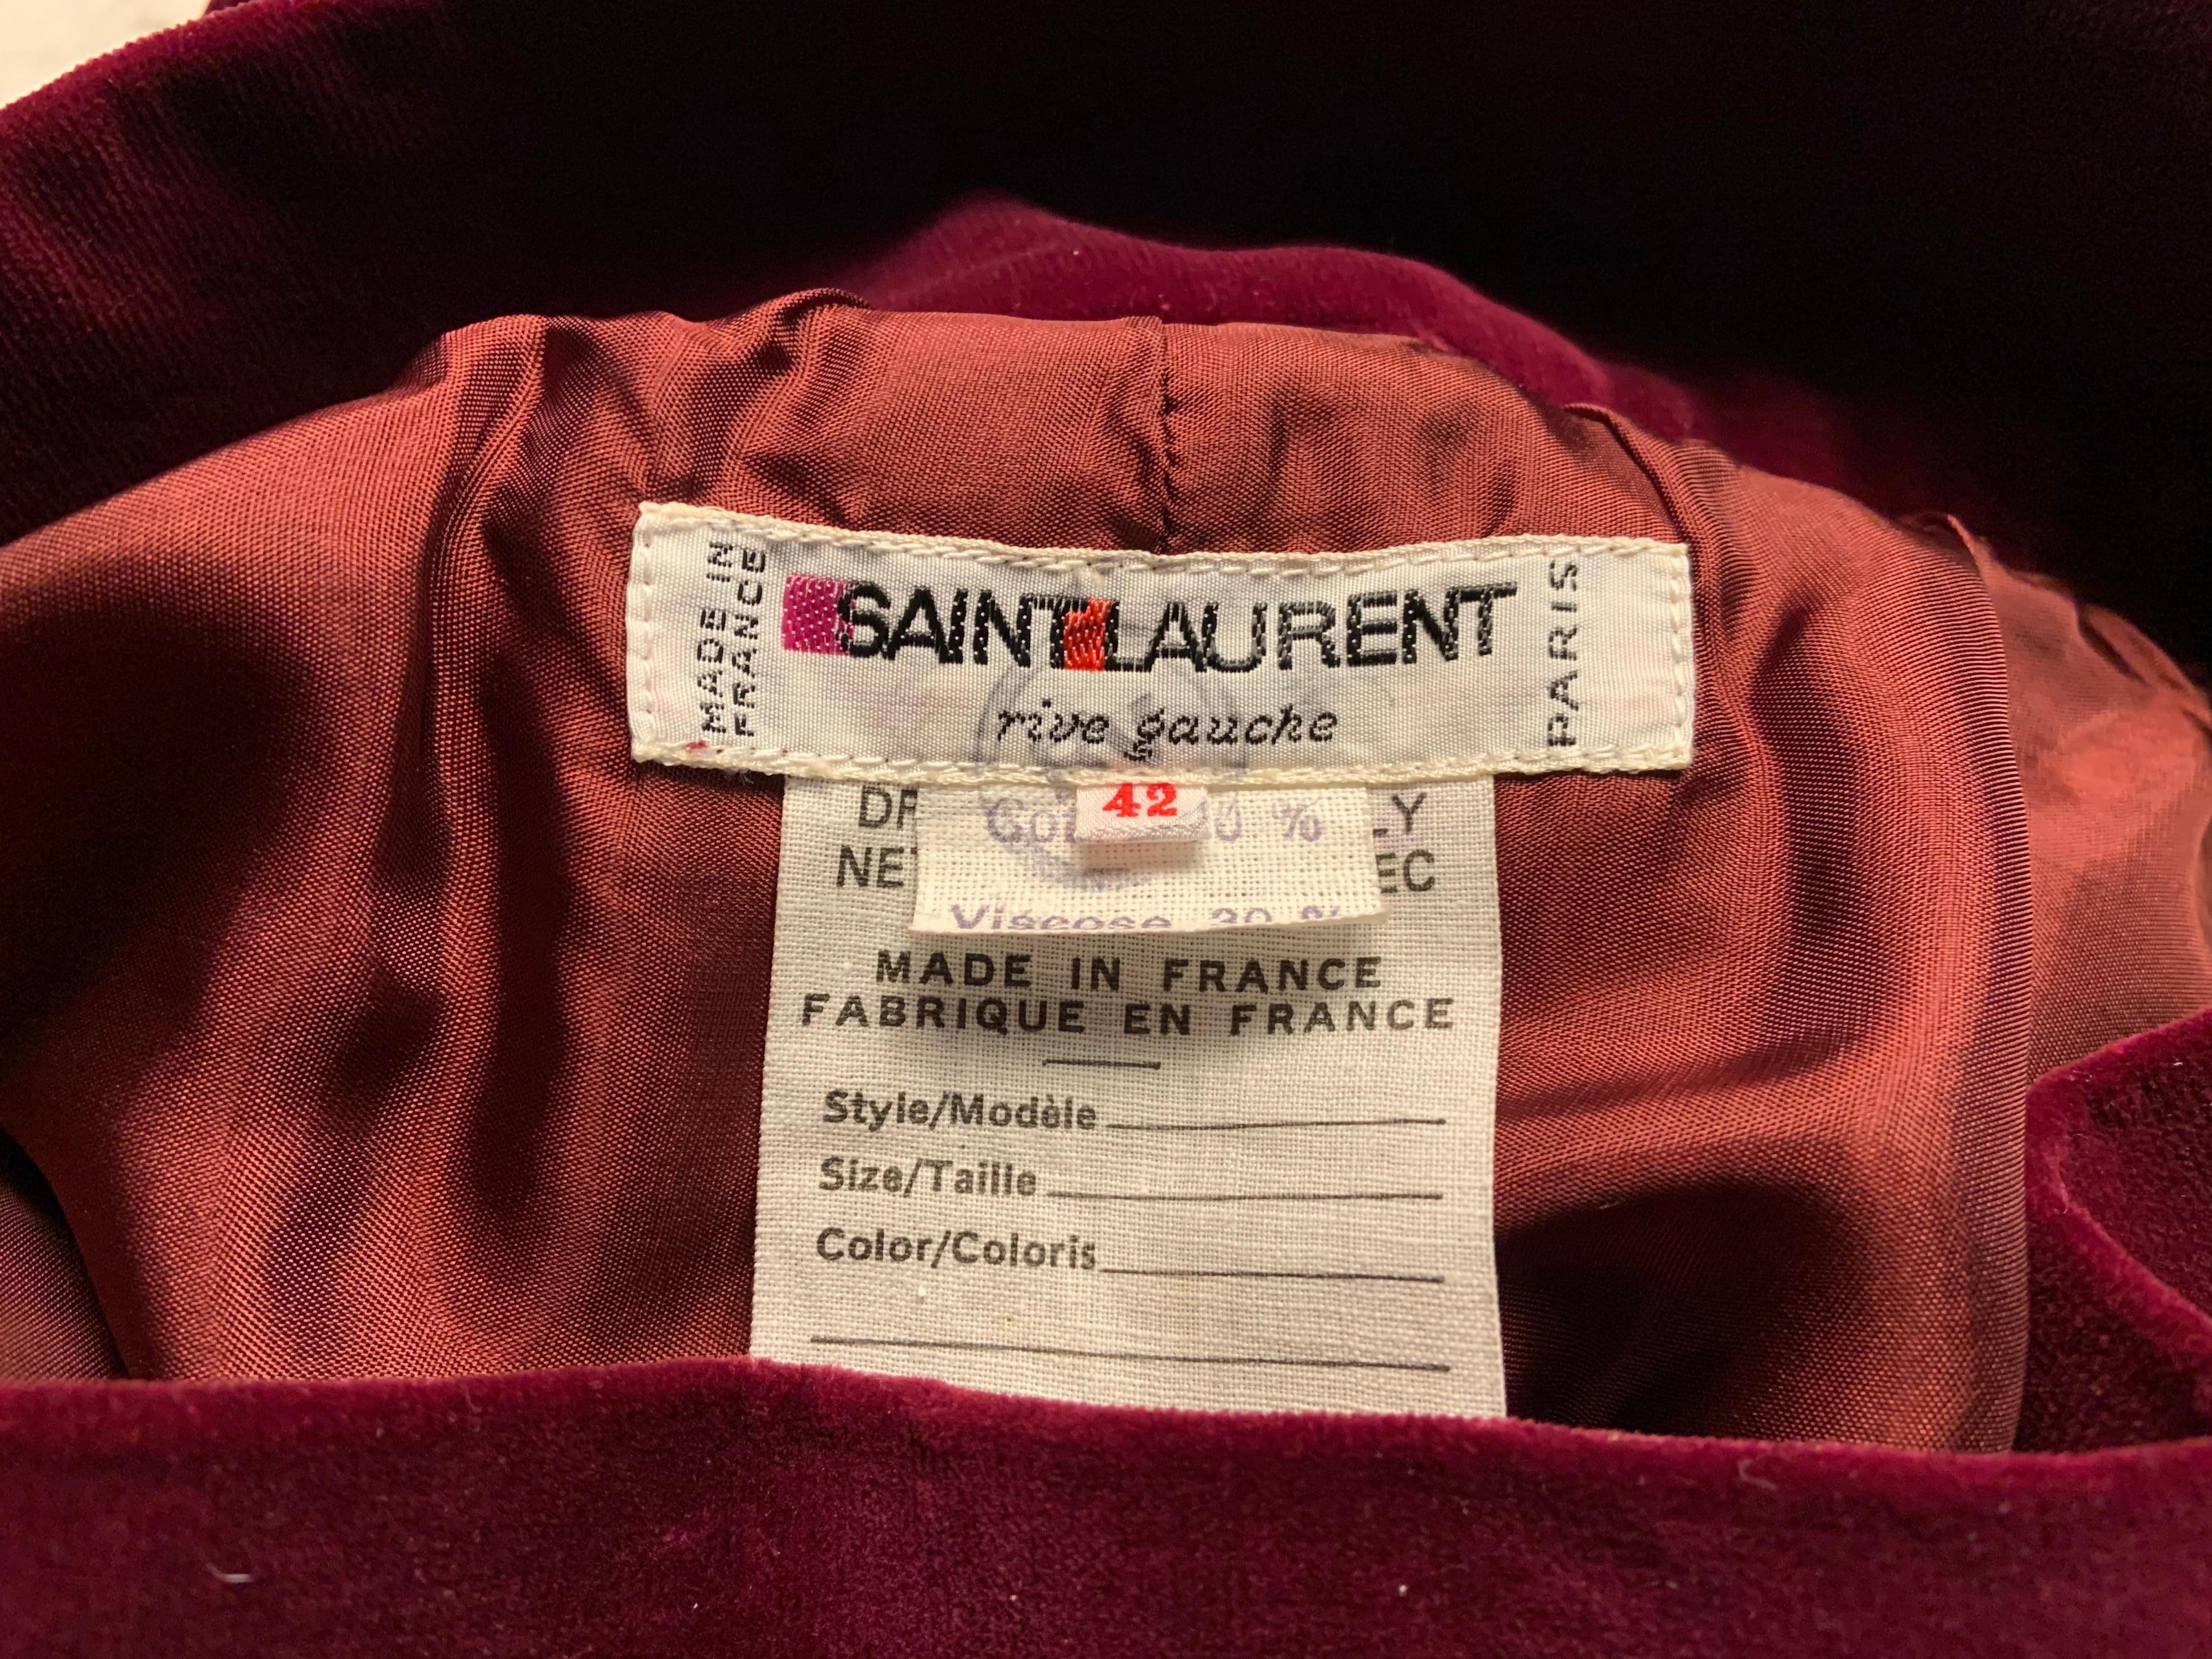 Yves Saint Laurent Claret Velvet Straight Skirt with High Waistband In Excellent Condition For Sale In New Hope, PA